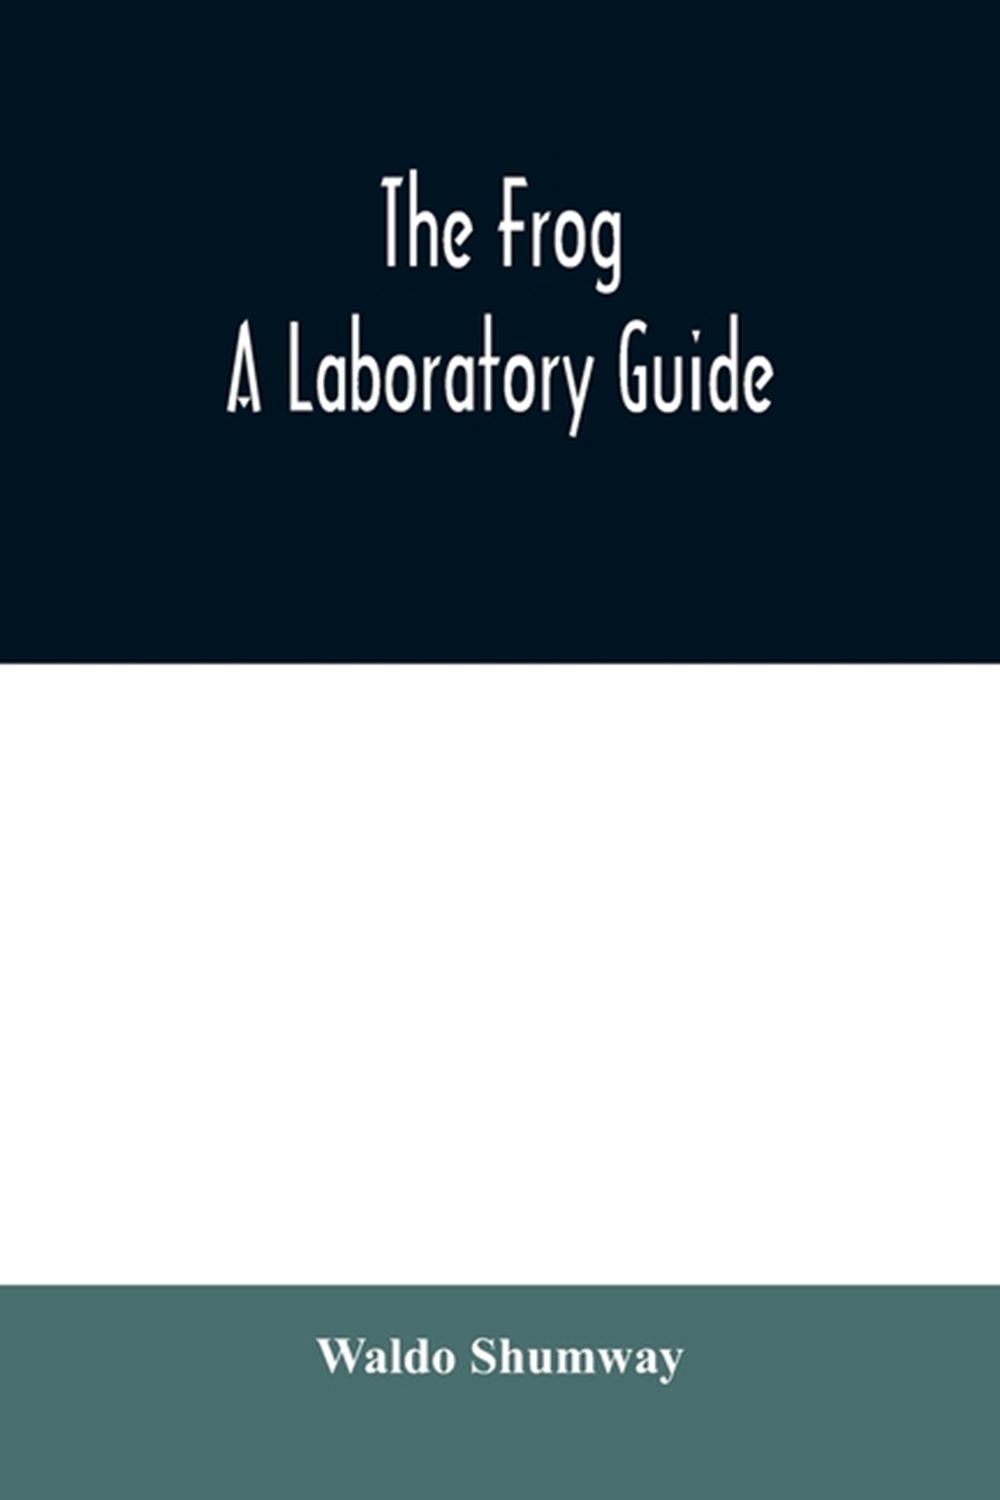 frog: a laboratory guide